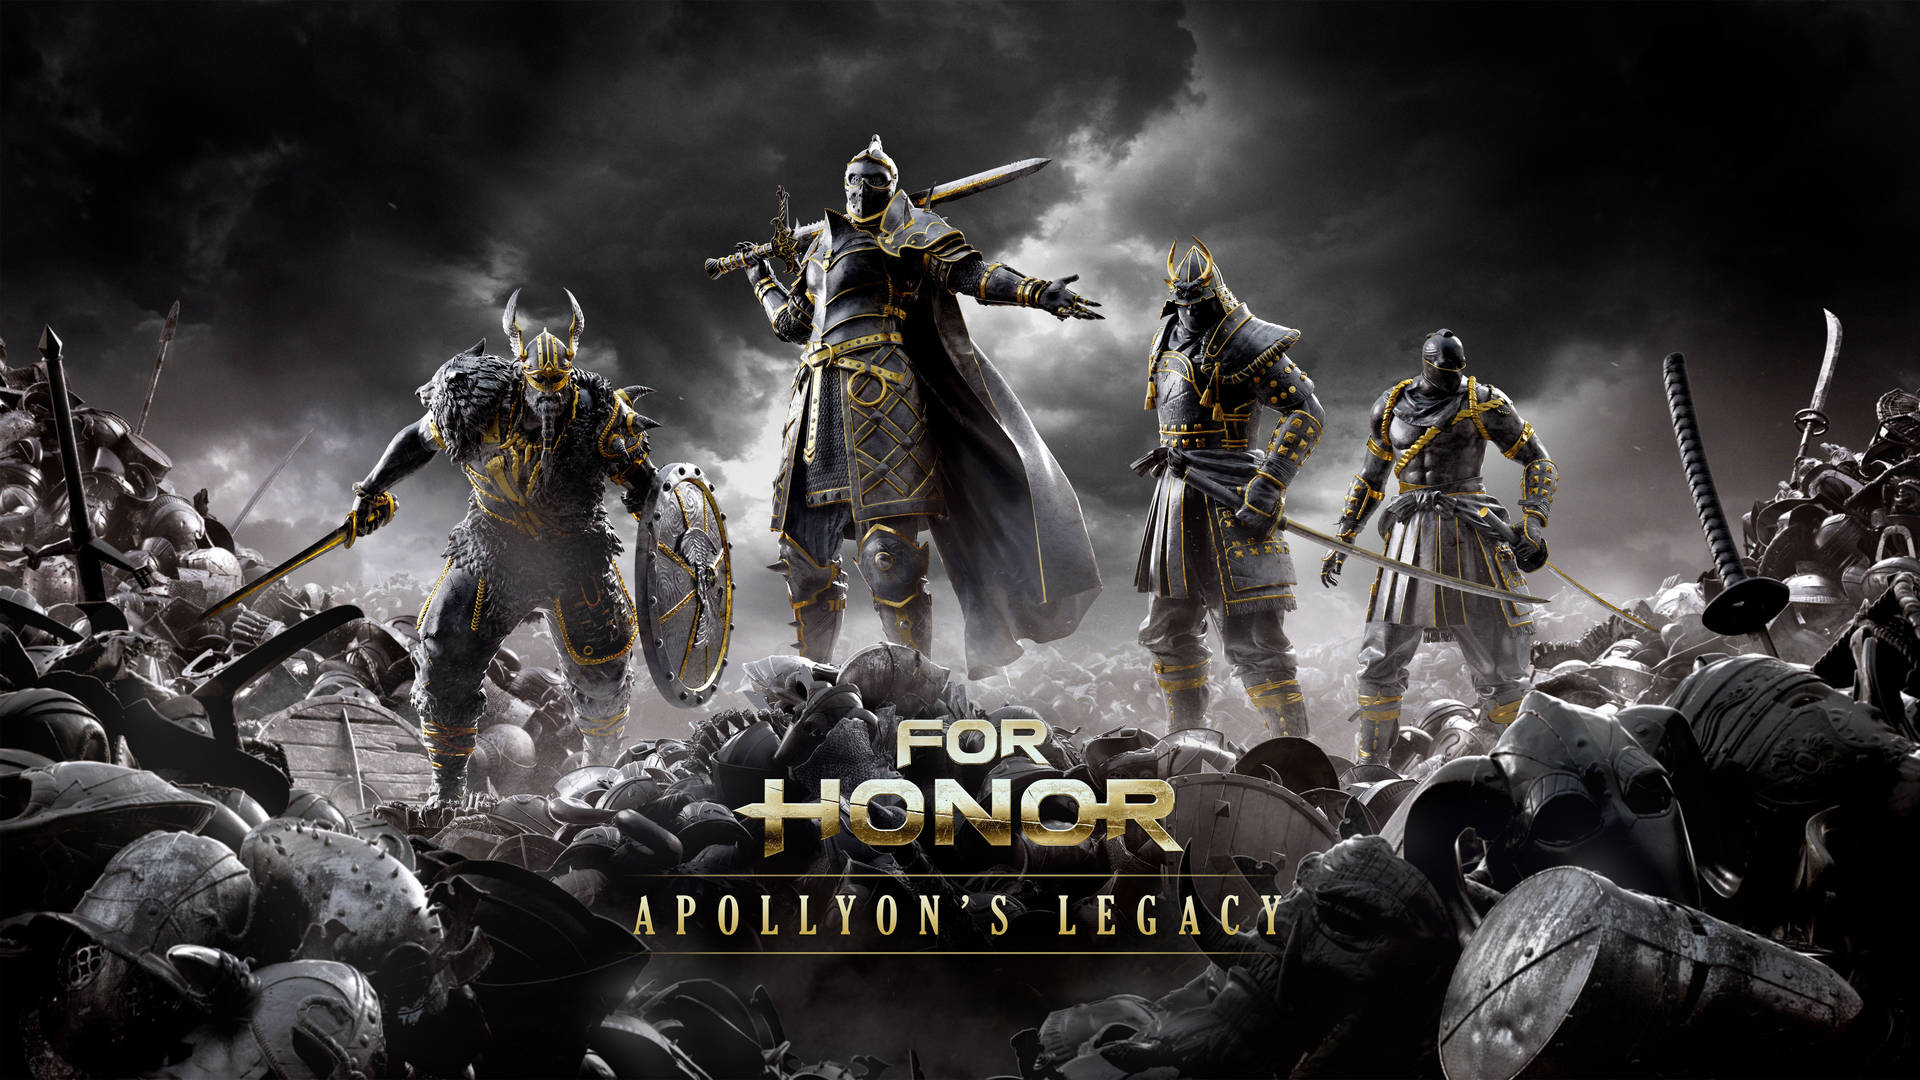 For Honor Apollyon's Legacy Poster Picture